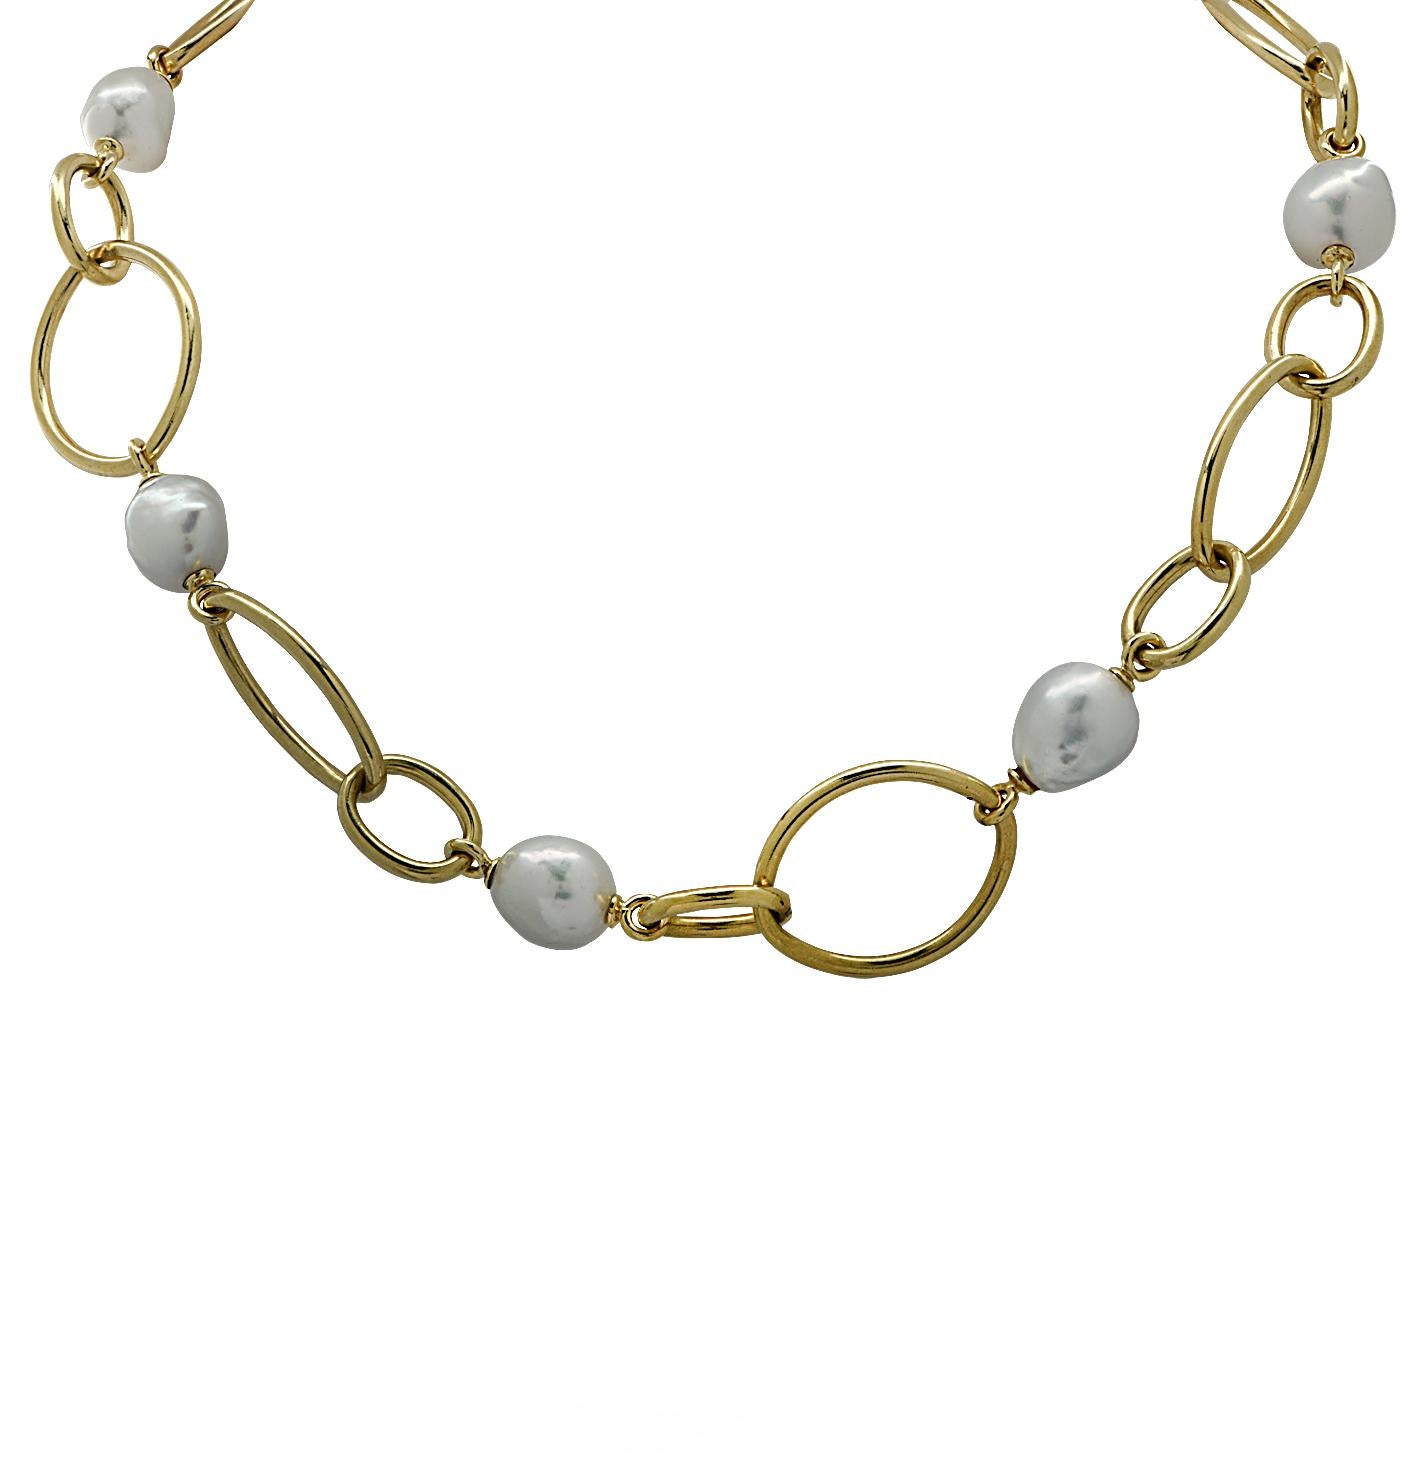 Beautiful necklace crafted in 18 karat yellow gold featuring 7 Baroque Pearls measuring approximately 10-12 mm each, interspersed with yellow gold marquise and oval shaped links. This necklace measures 19 inches in length and .9 of an inch at its